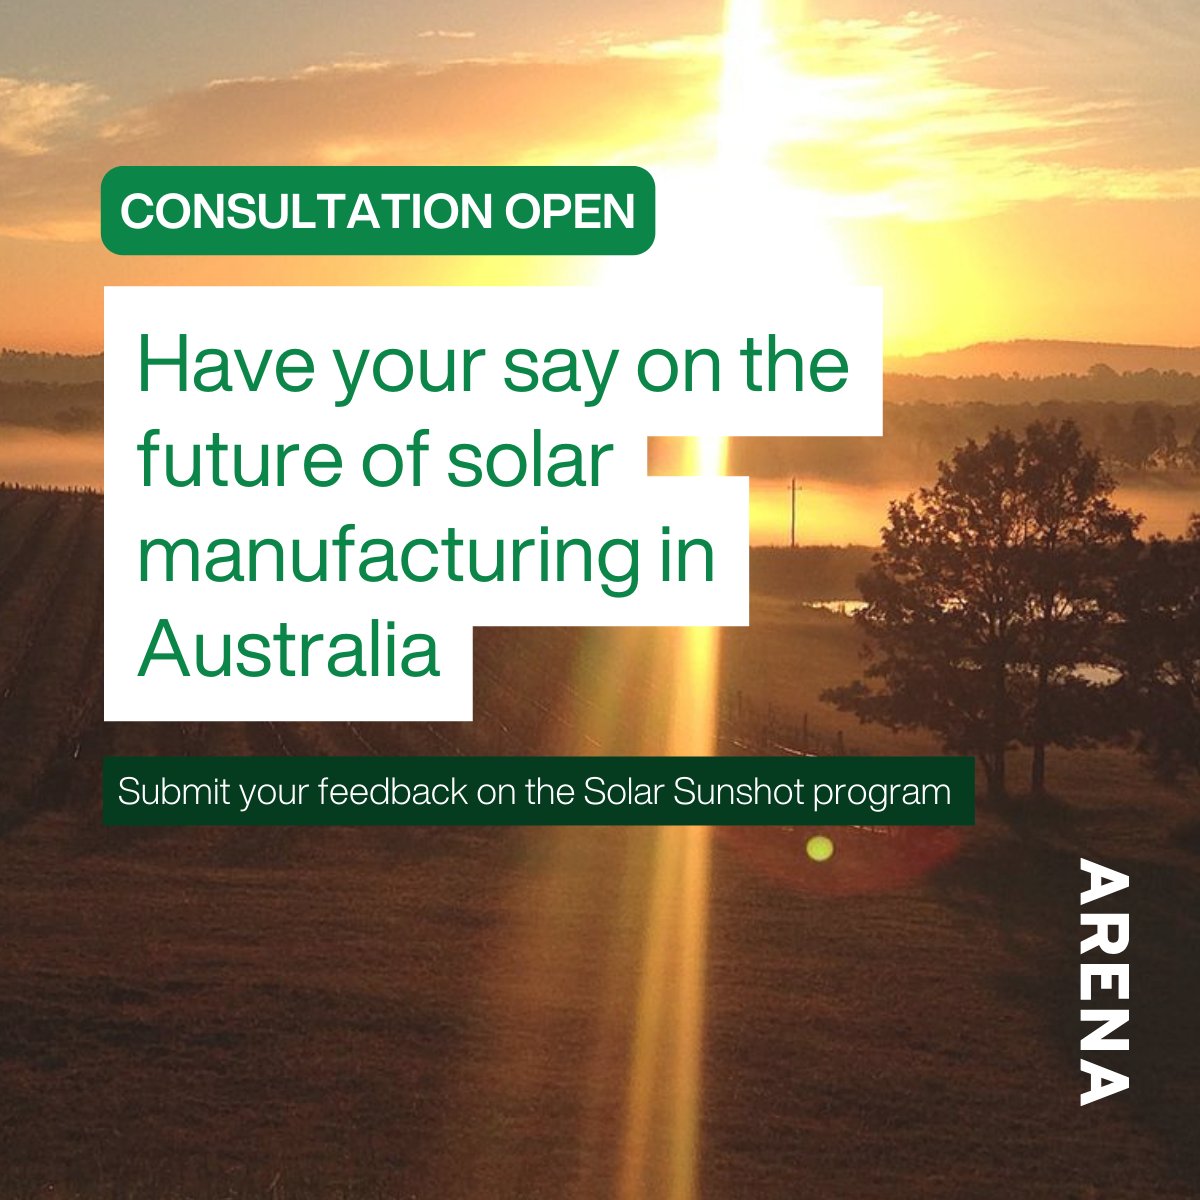 Consultation is now open for the Solar Sunshot program. We’re seeking input on the program design to scale up Australia’s solar PV manufacturing capacity. Read the consultation paper & have your say by Fri 31 May: arena.gov.au/funding/solar-… @DCCEEW